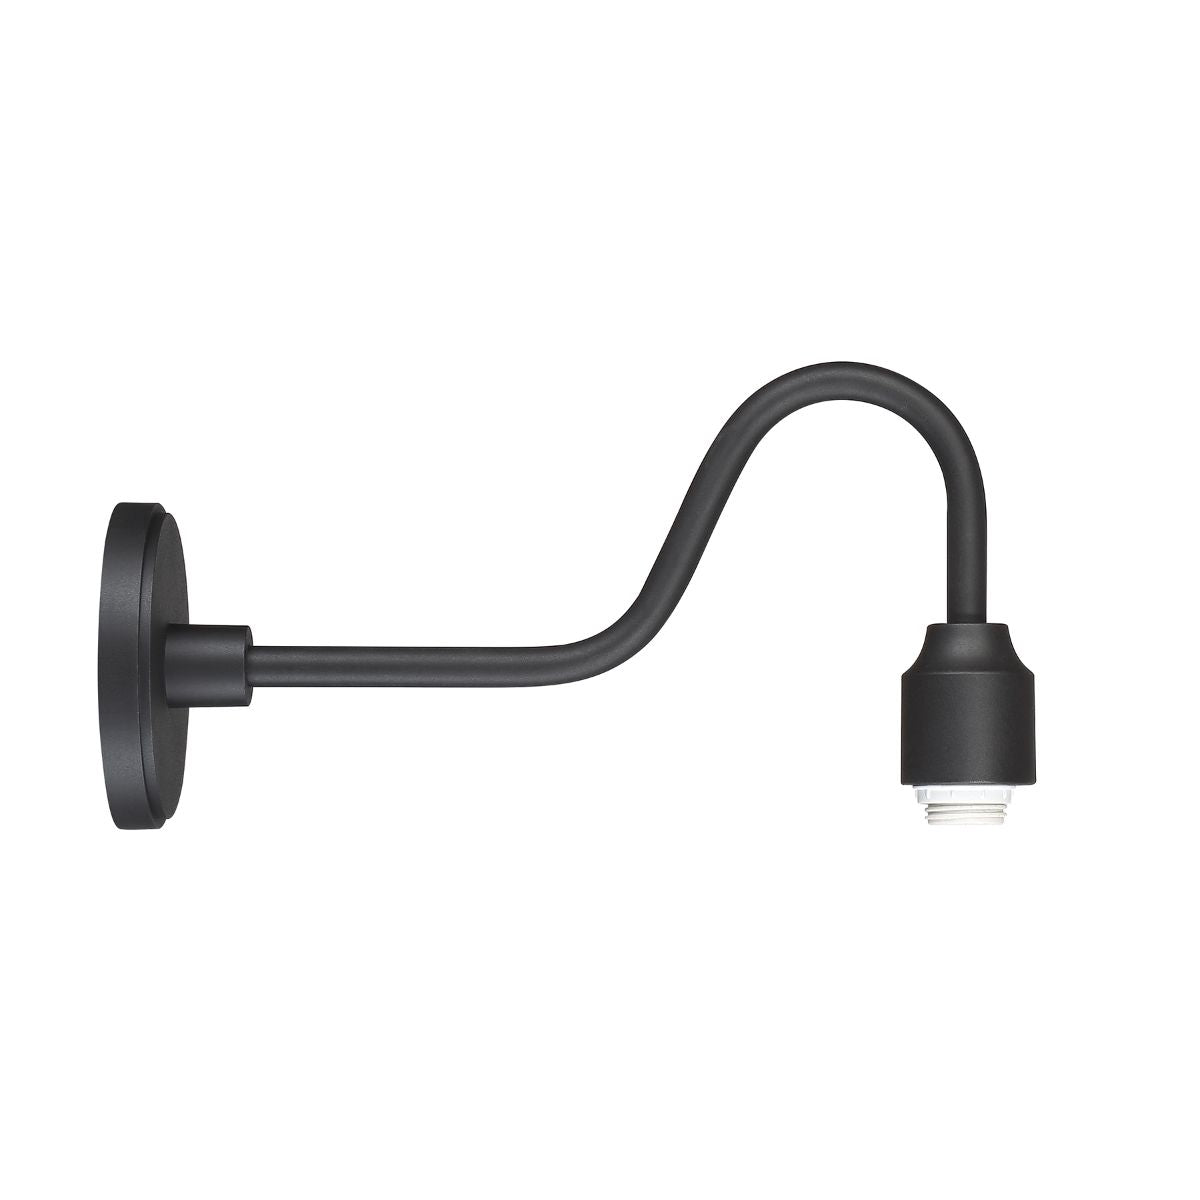 RLM Outdoor Wall Mount 17 In. Curved Arm Black Finish